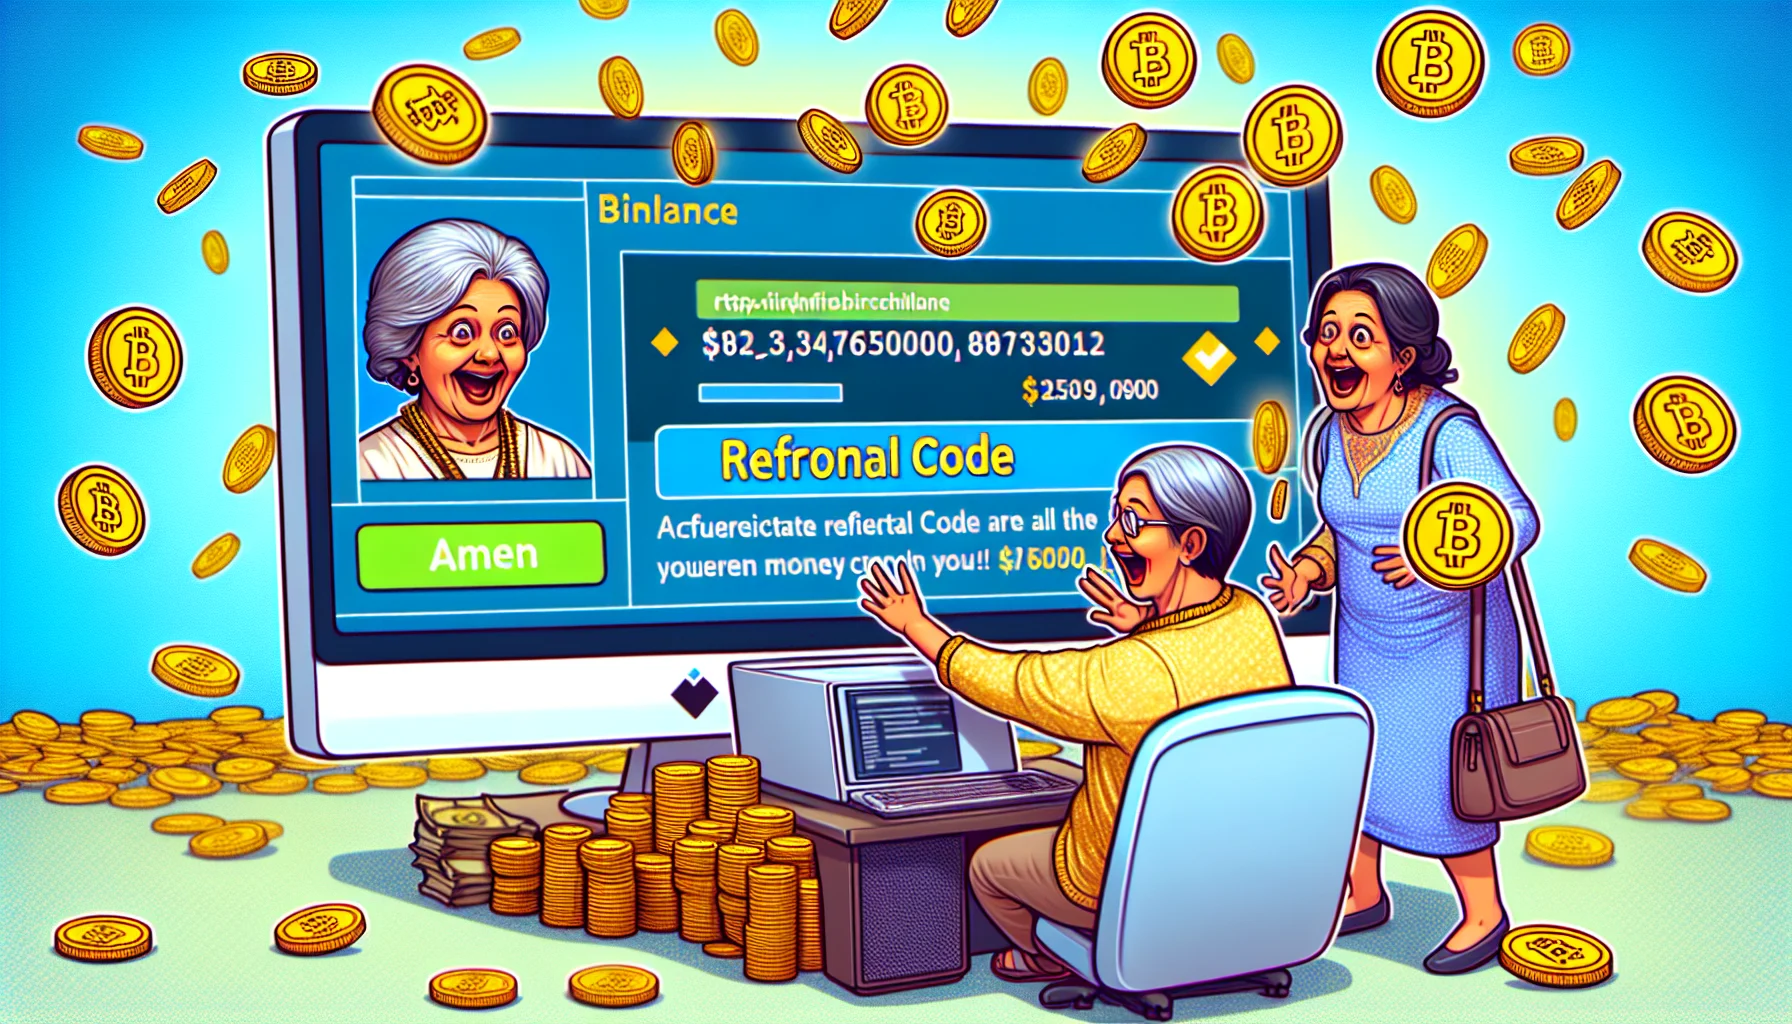 Create an amusing and realistic image featuring a representation of a cryptocurrency affiliate program, like the idea of Binance. Illustrate a compelling scene related to earning money online. Perhaps show an individual excitedly watching their computer as digital coins overflow from the screen, symbolising potential earnings. Add an actual referral code somewhere in the picture as a quirky detail, making it seem like the code is the key to all this digital wealth. The person could be a middle-aged South Asian woman, adding diversity to the image.